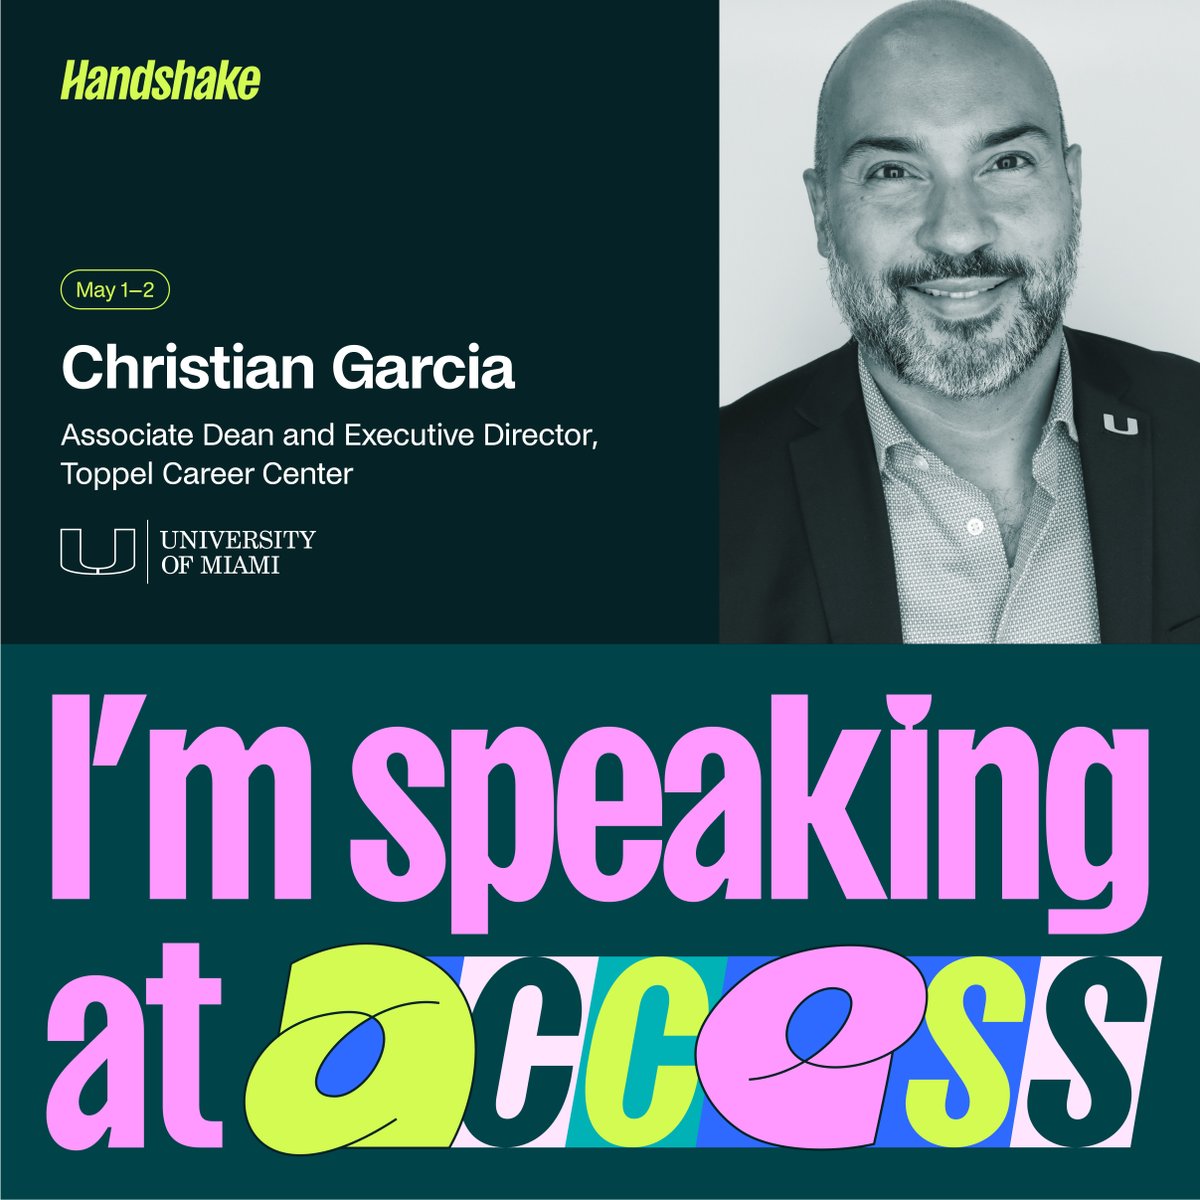 Excited to speak at #HandshakeAccess! Register for the free virtual event →bit.ly/Access-24 Access is @joinhandshake’s annual conference dedicated to developing our workforce. Join us on May 1 as we discuss the next ten years of early talent transformation. #UMiami